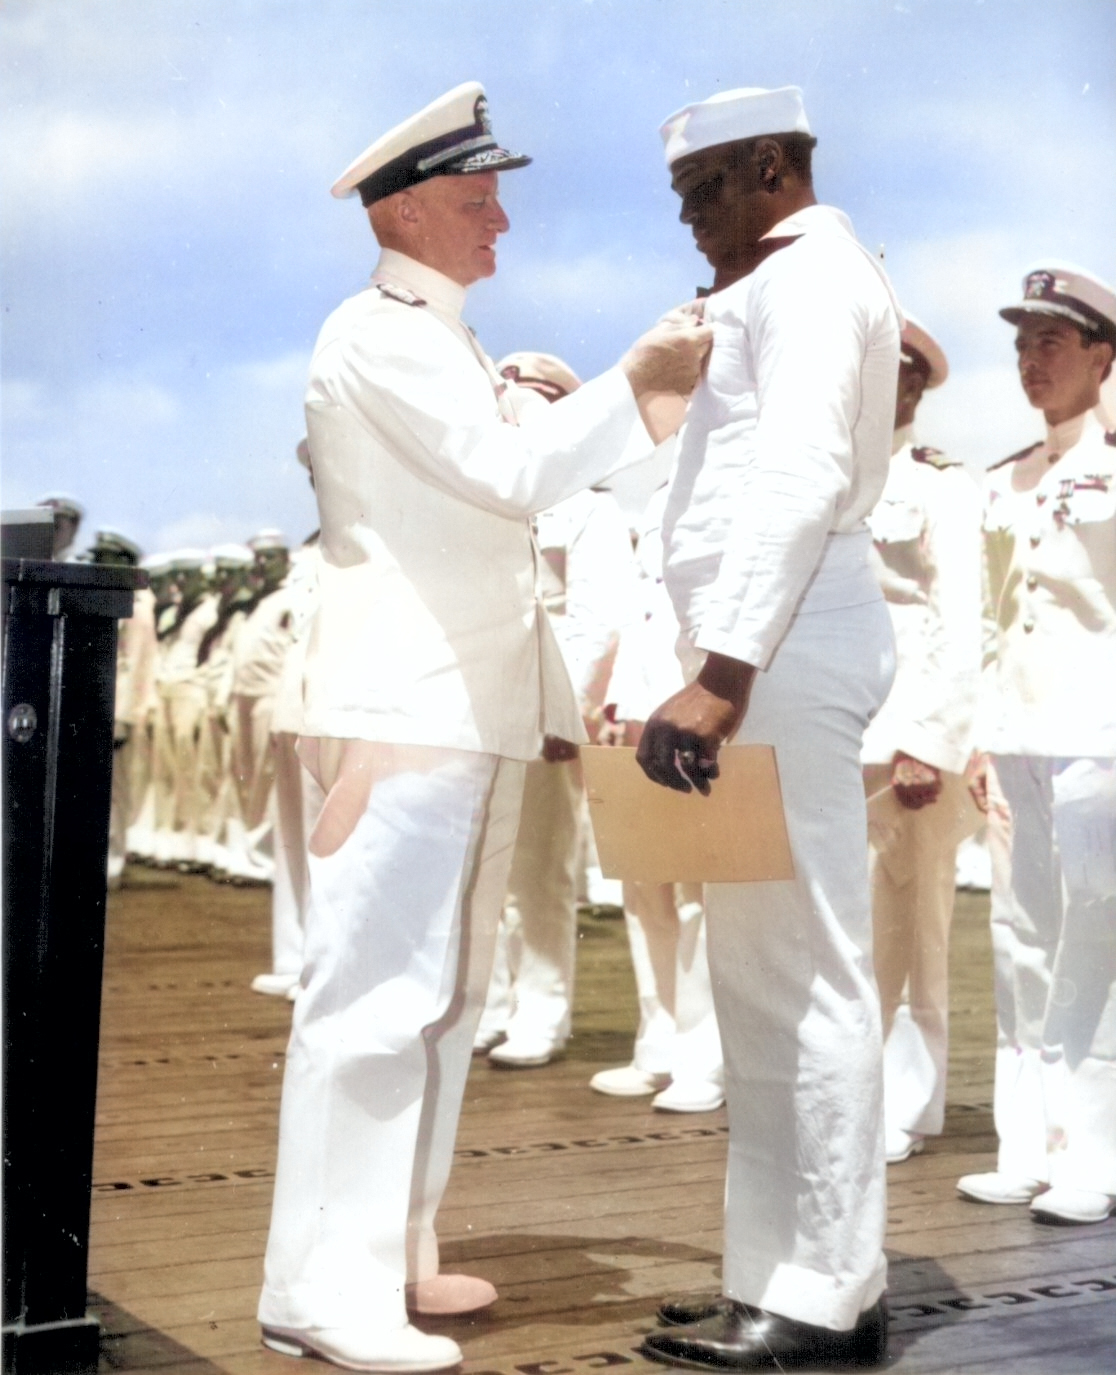 Doris Miller receiving the Navy Cross award from Admiral Chester Nimitz, onboard carrier Enterprise, Pearl Harbor, US Territory of Hawaii, 27 May 1942; photo 2 of 2 [Colorized by WW2DB]